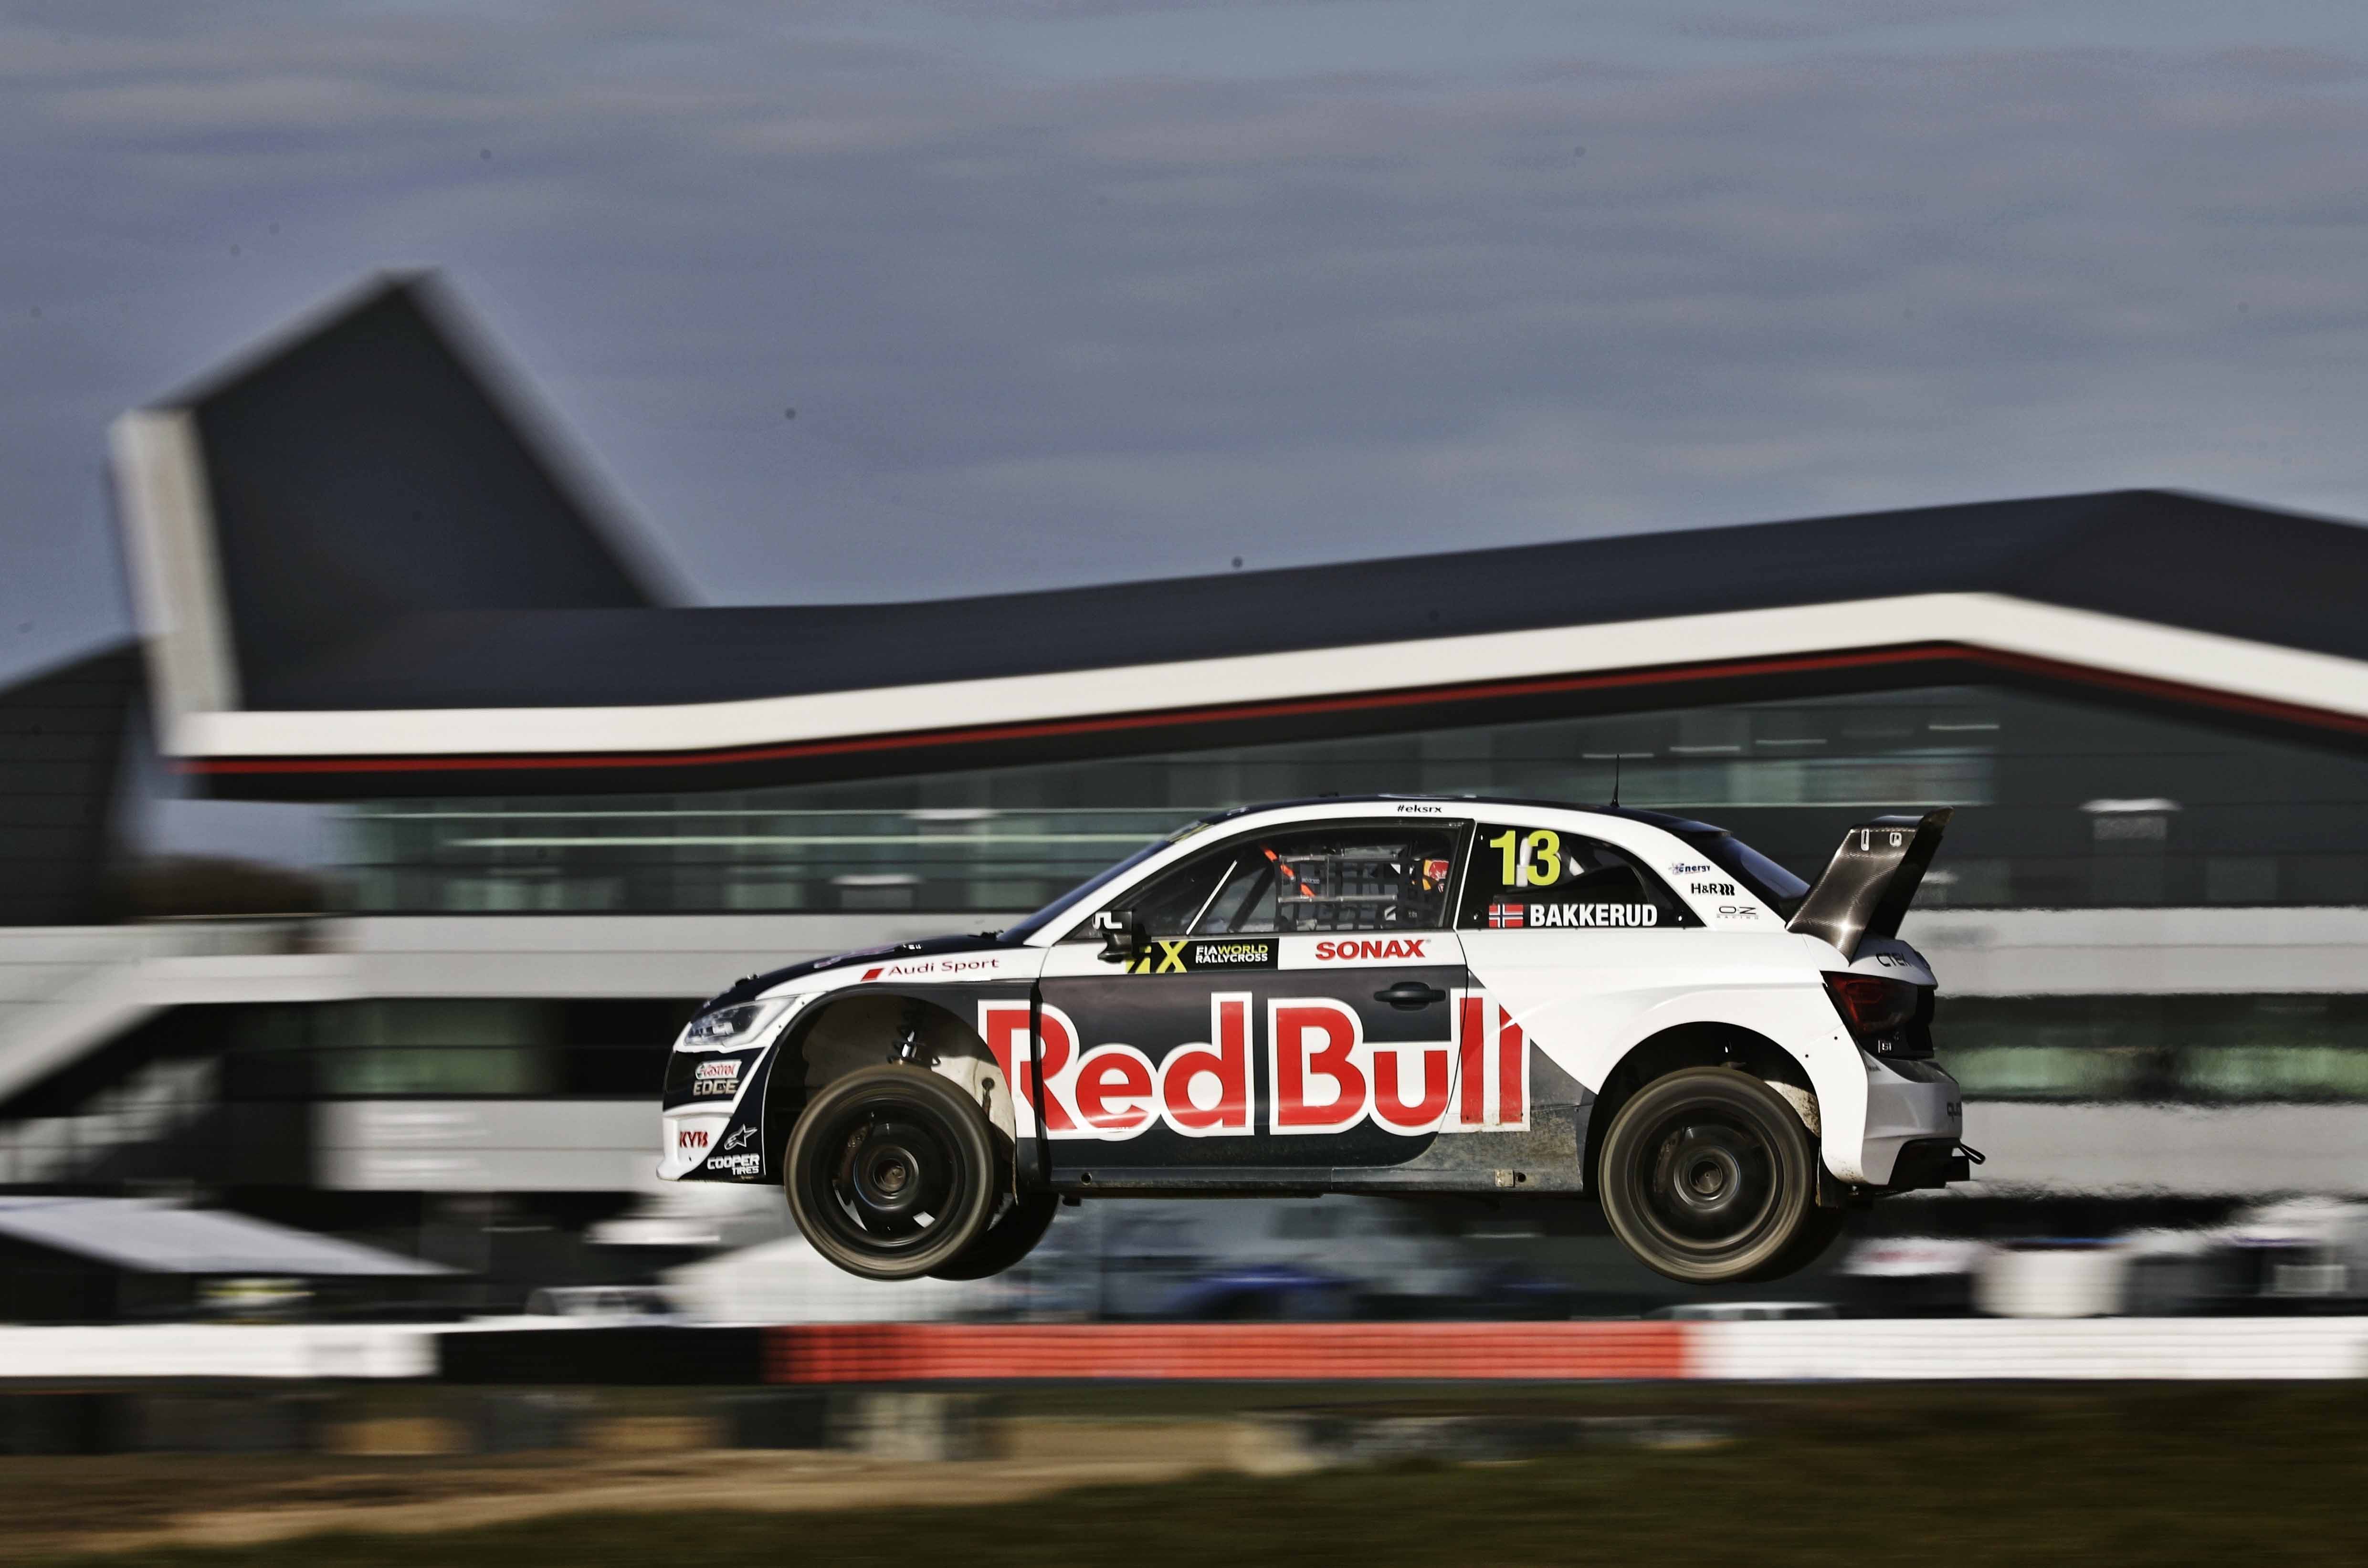 Lessons in gravel and jumping with Audi's rallycross stars at